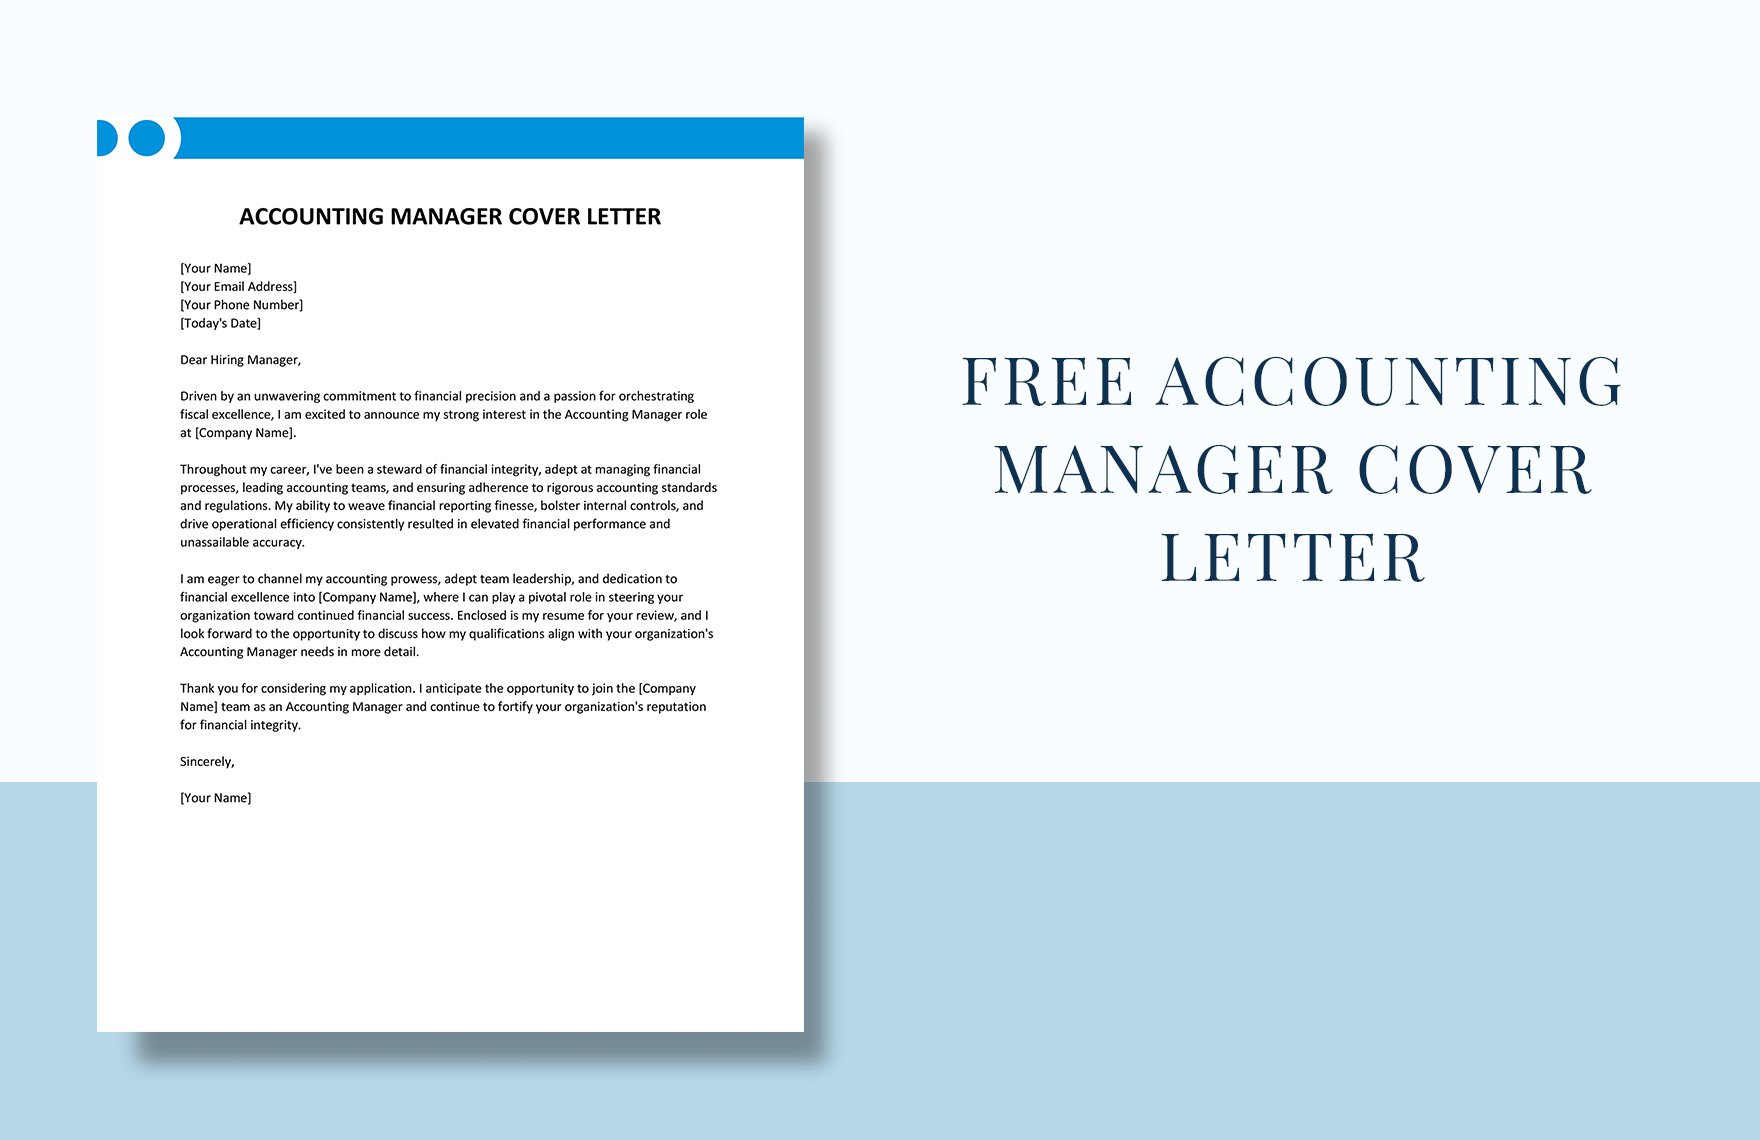 Accounting Manager Cover Letter